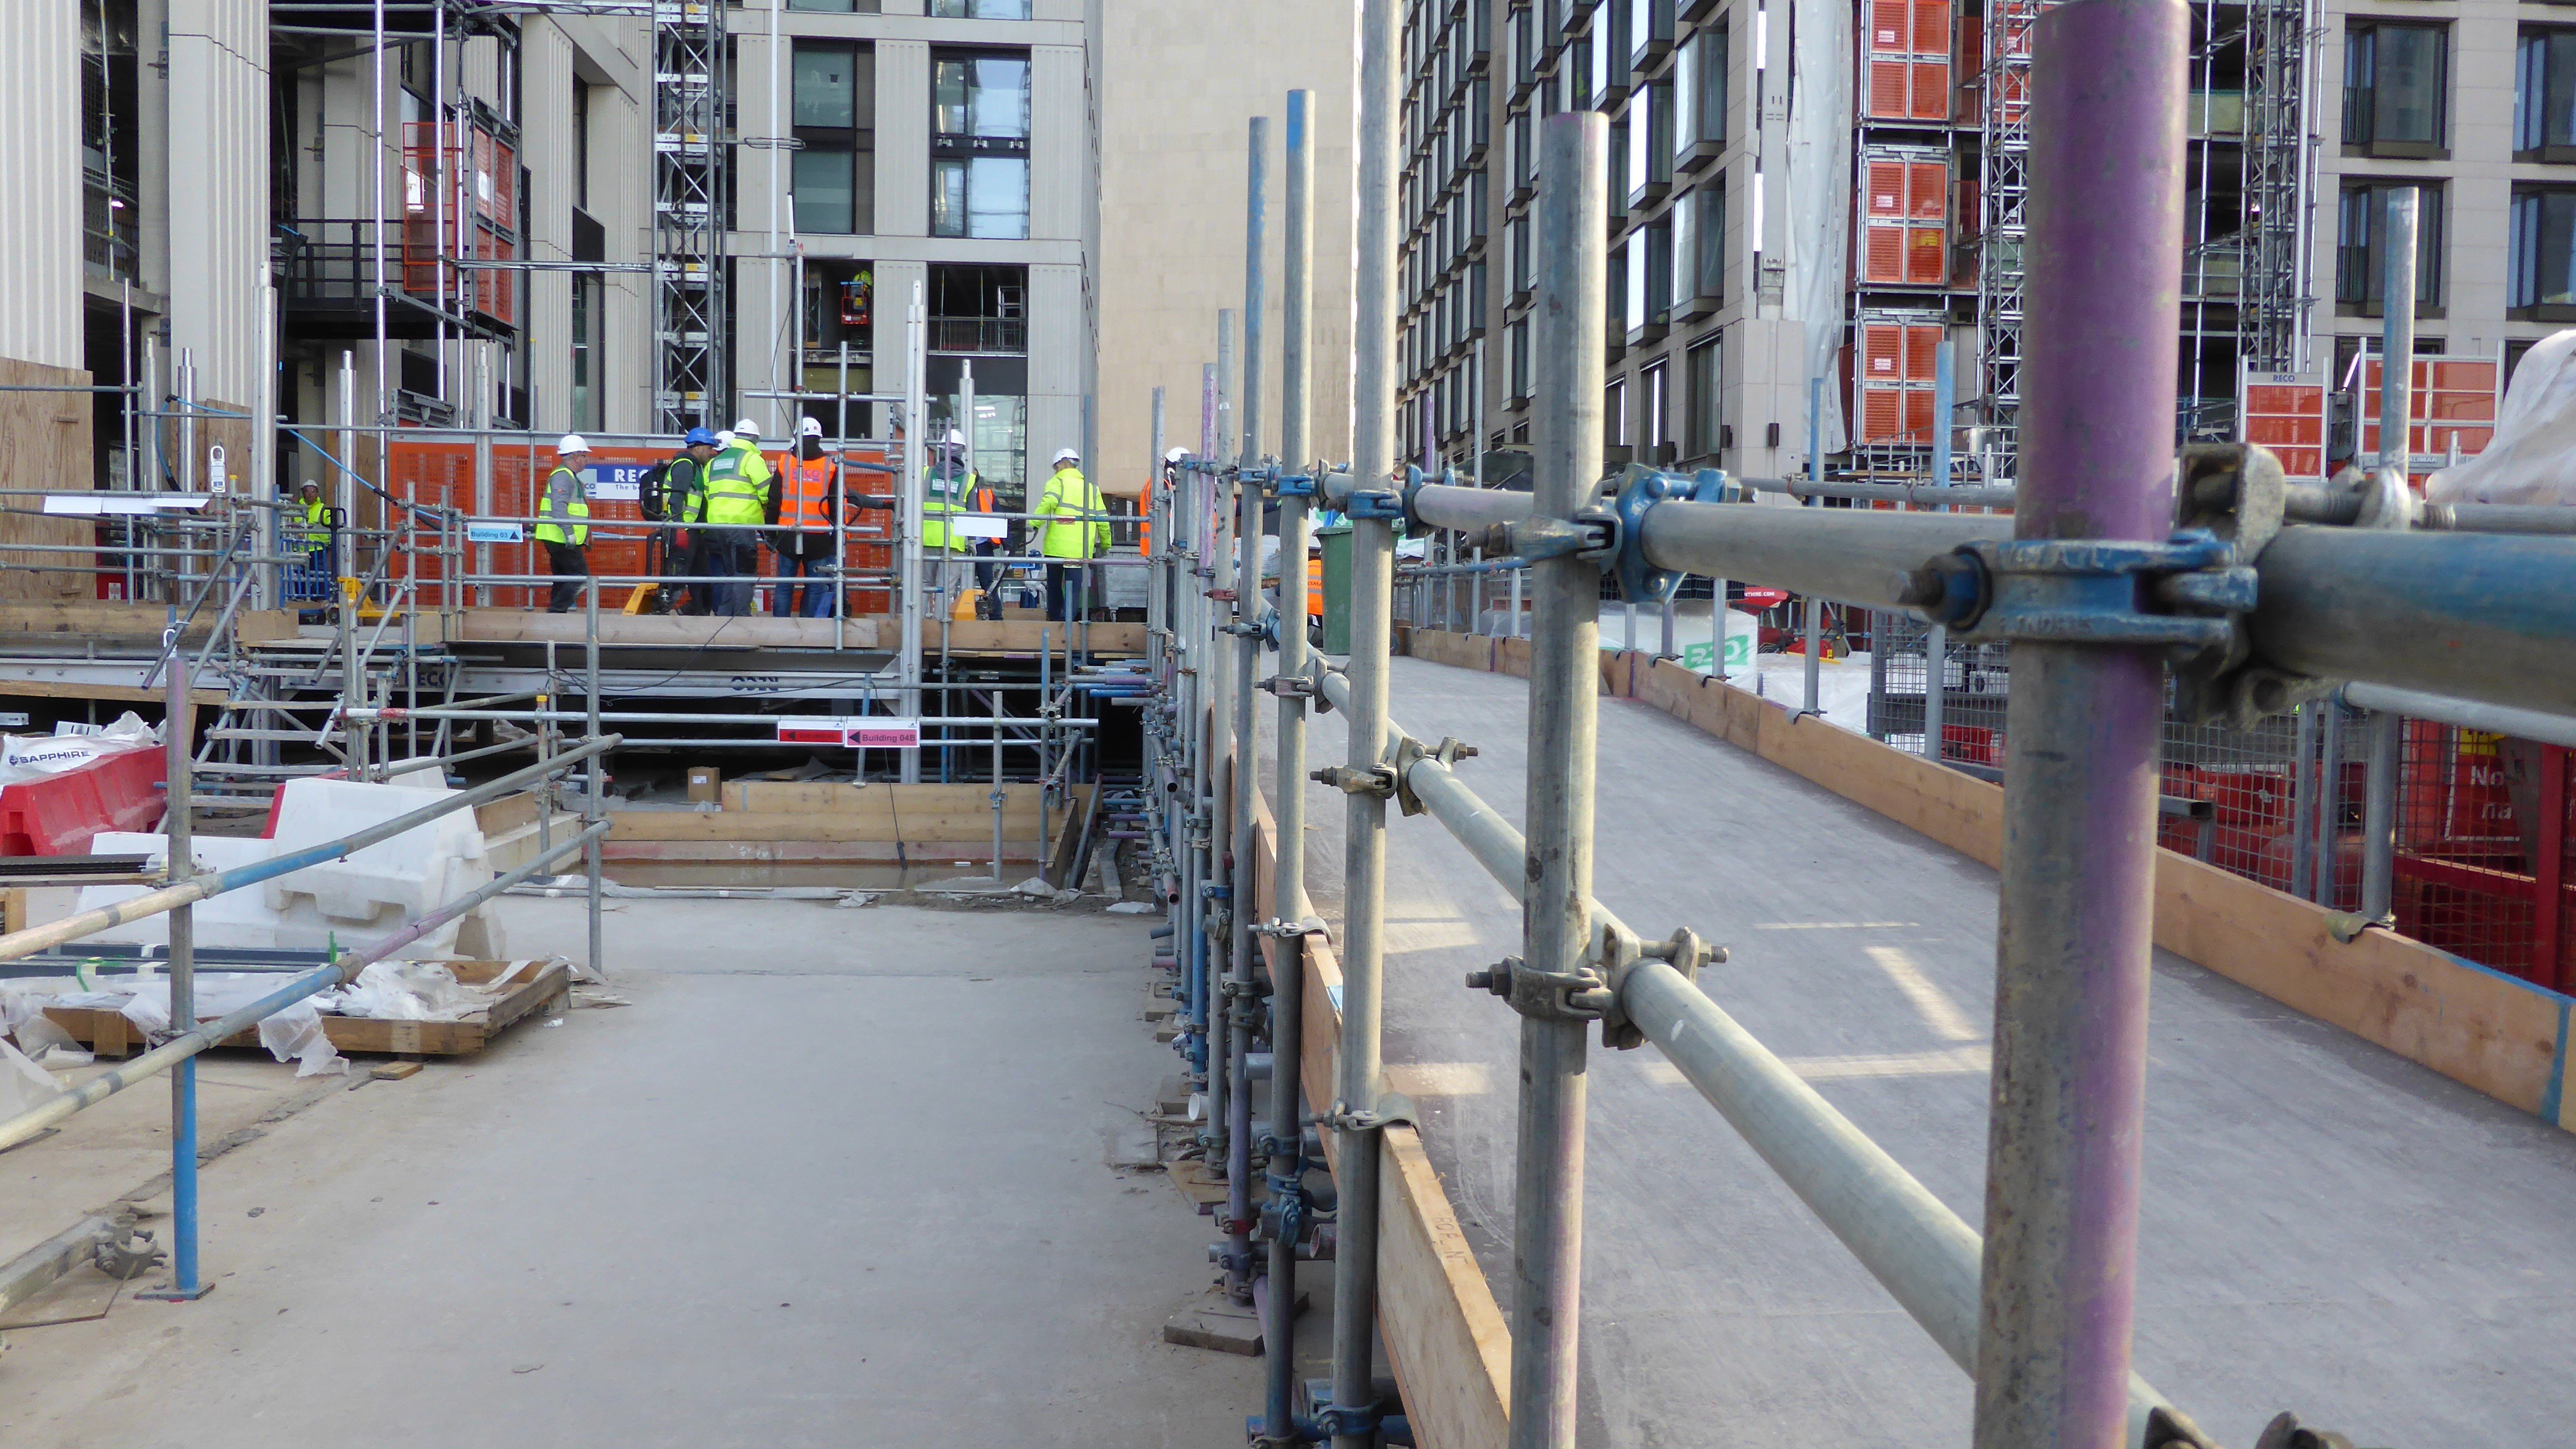 RECO Loading Docks for barrier-free access and goods handling between lorry and hoist at construction sites